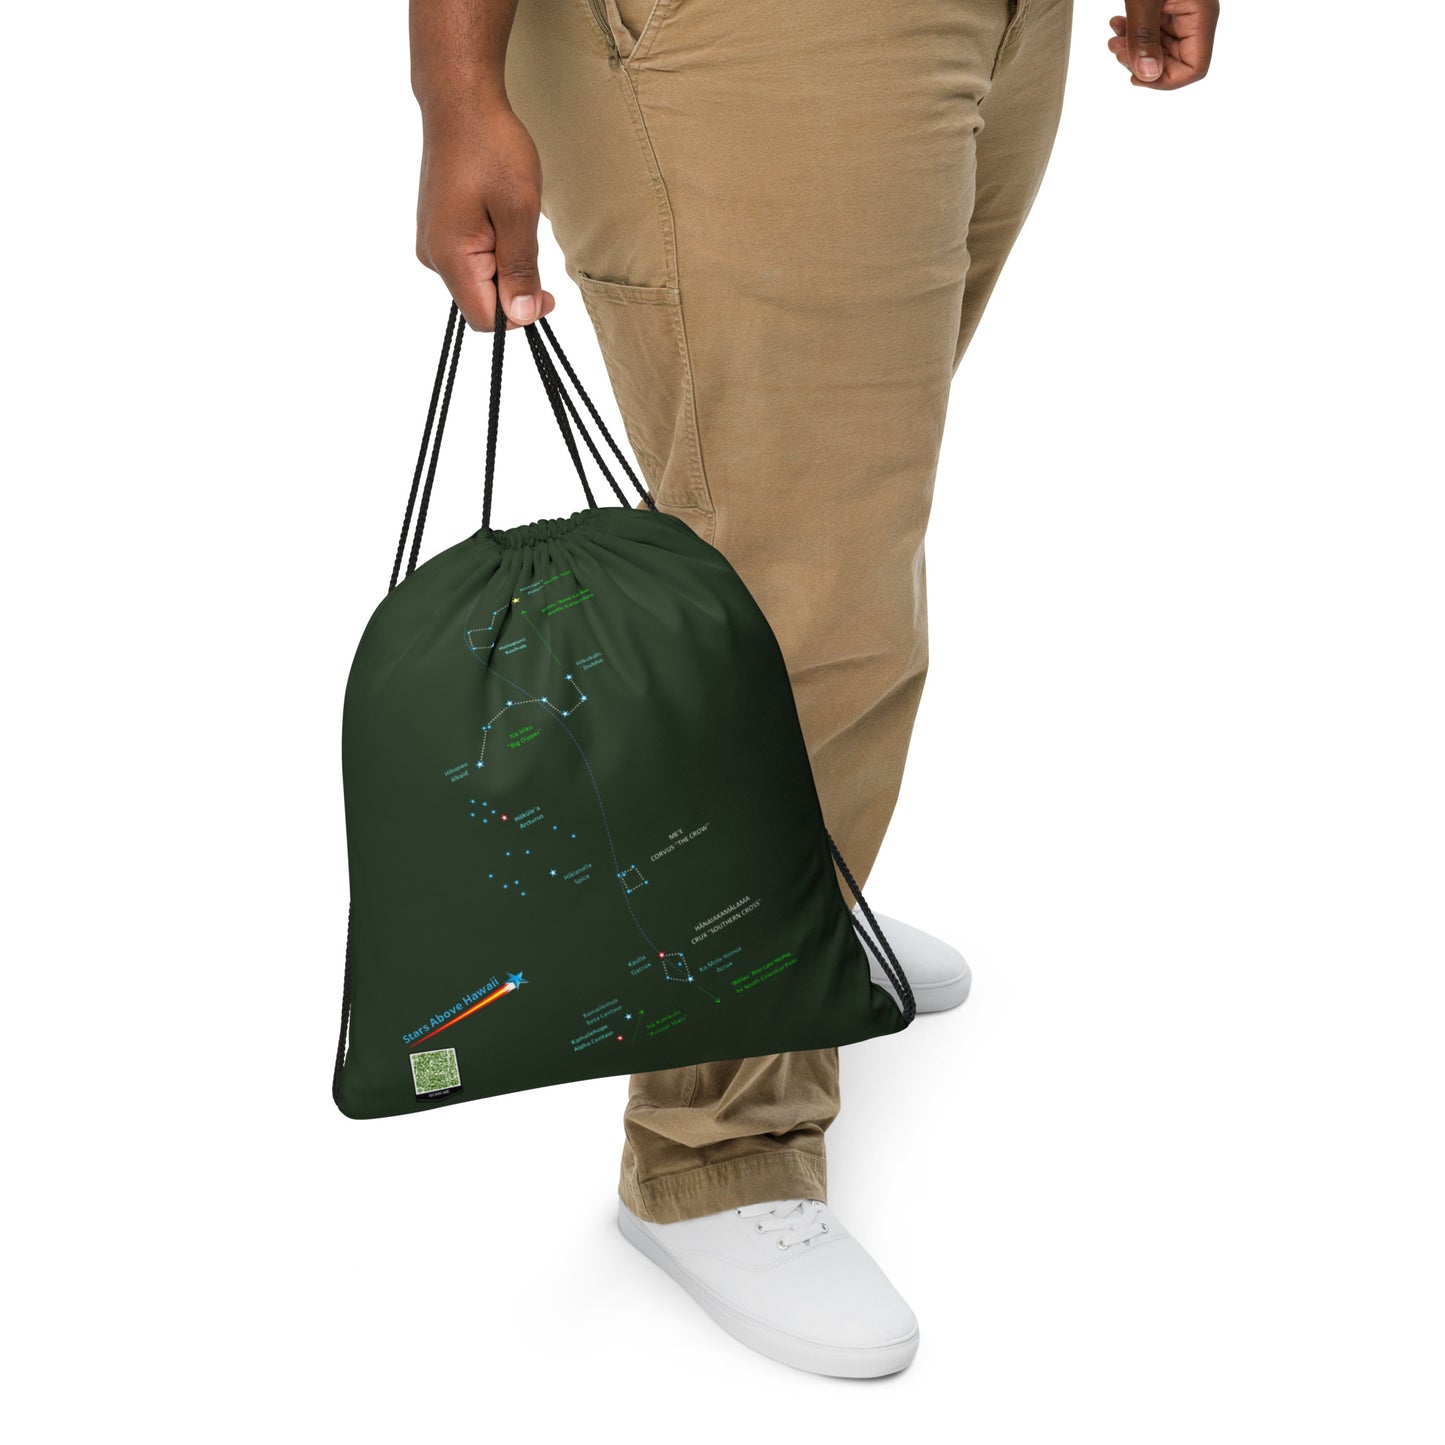 Drawstring Bag - North Star to Southern Cross - Hawaii Spring Star Line in Green